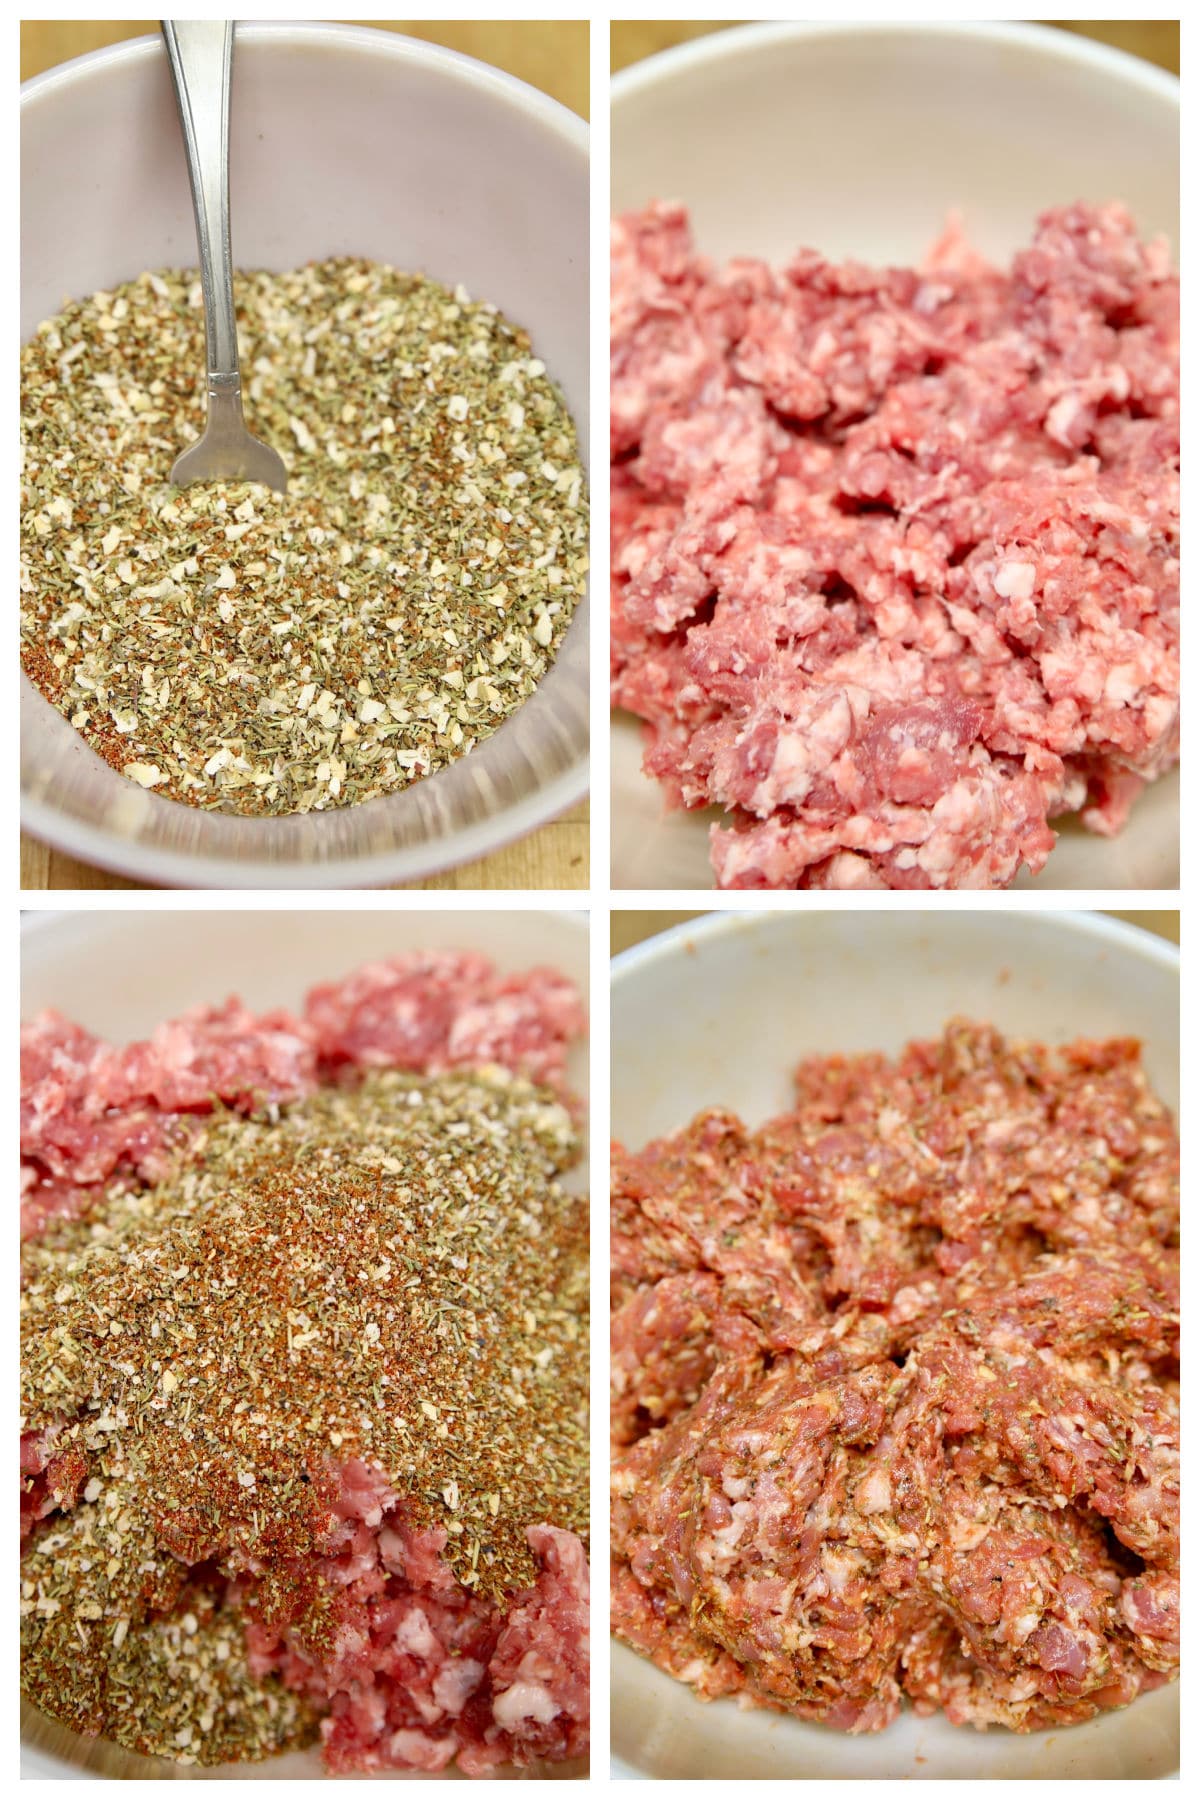 Collage: spices, ground pork, mixing together for sausage.